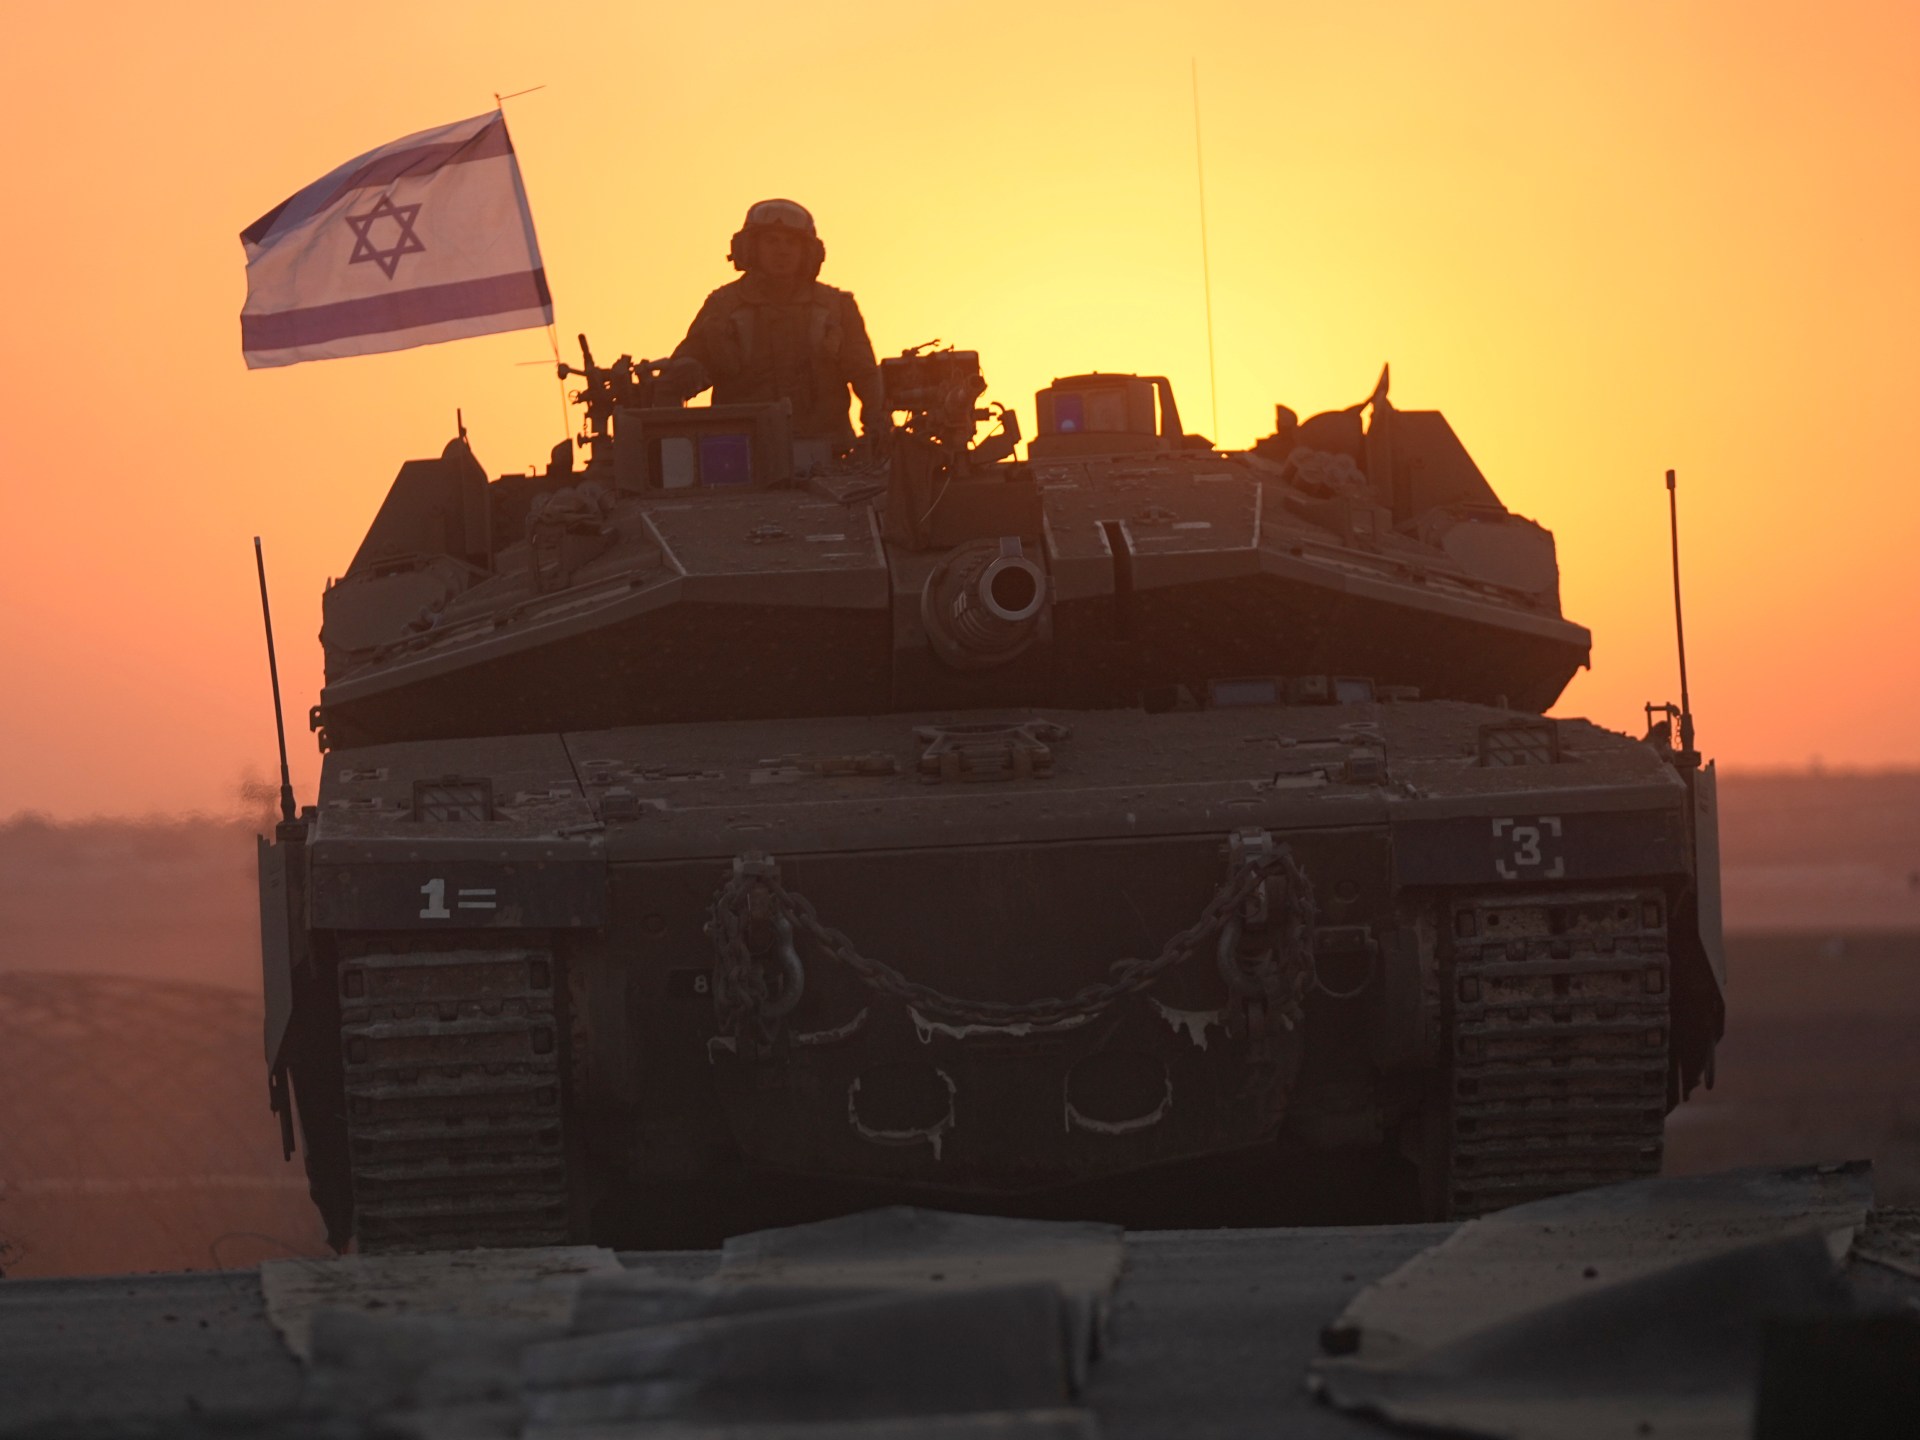 Israel ‘expanding’ troops in Gaza, Hamas to counter with ‘full force’